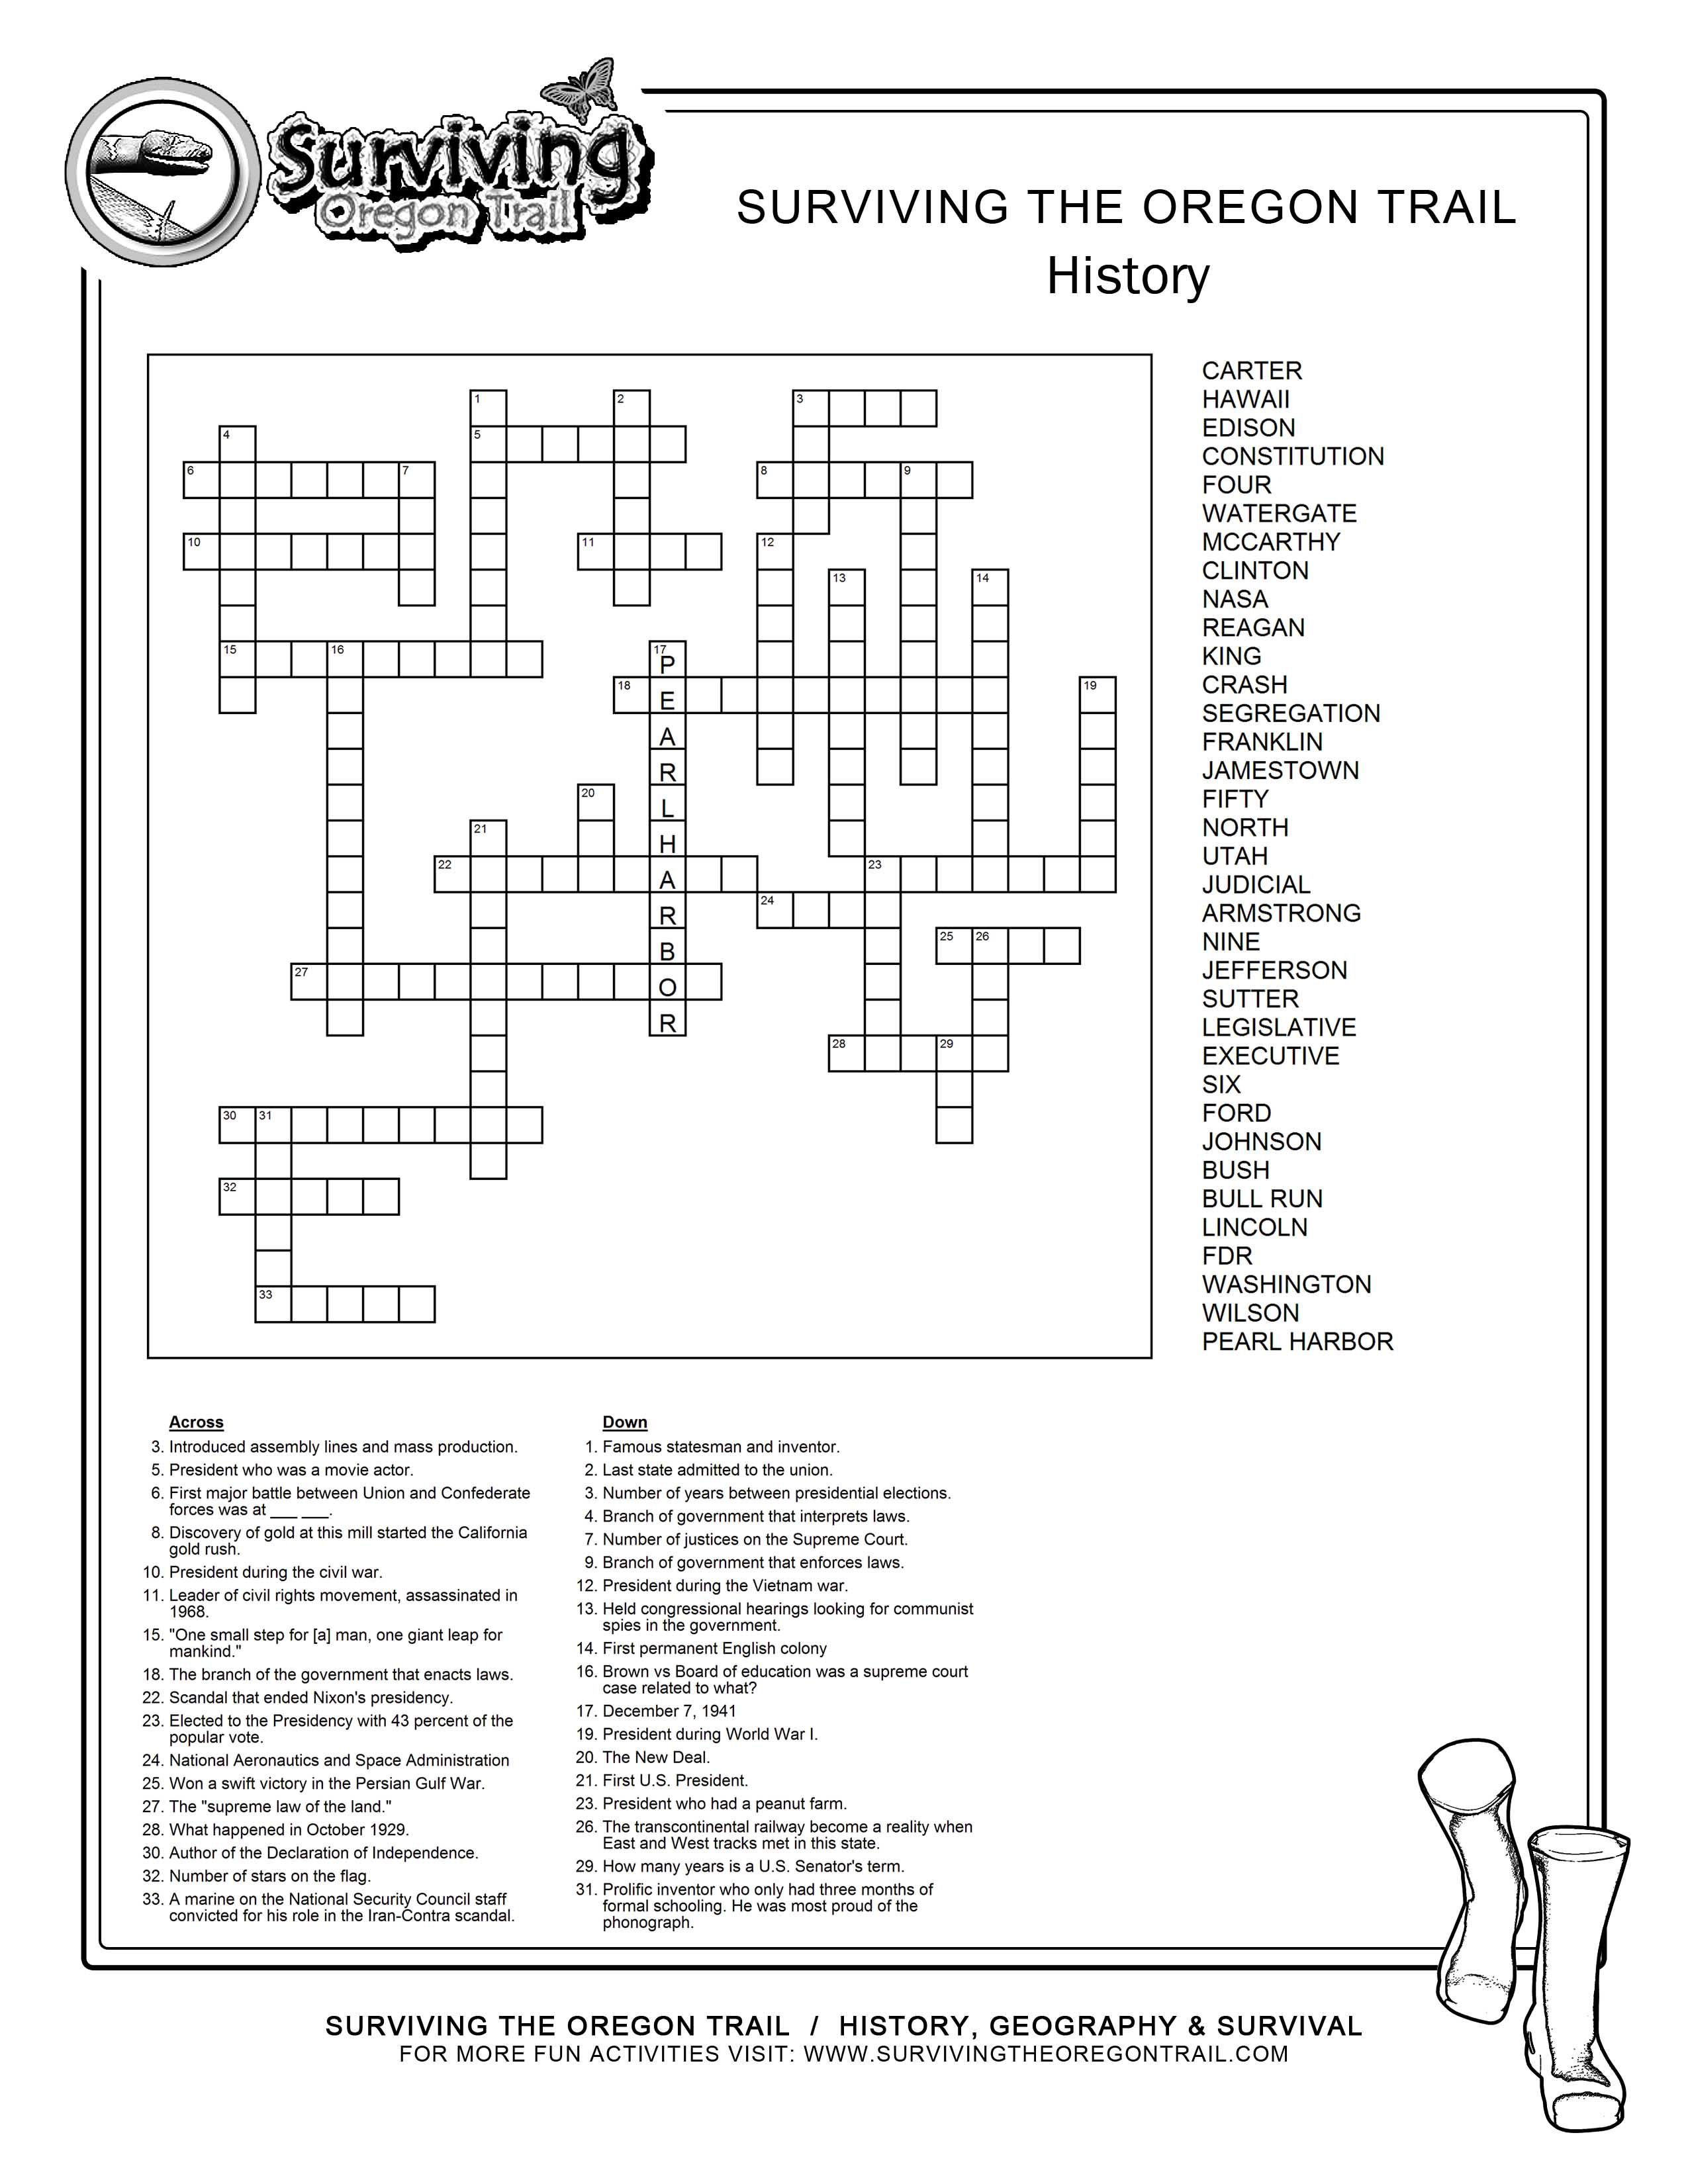 Fill Free To Save This Historical Crossword Puzzle To Your Computer - Friends Crossword Puzzle Printable